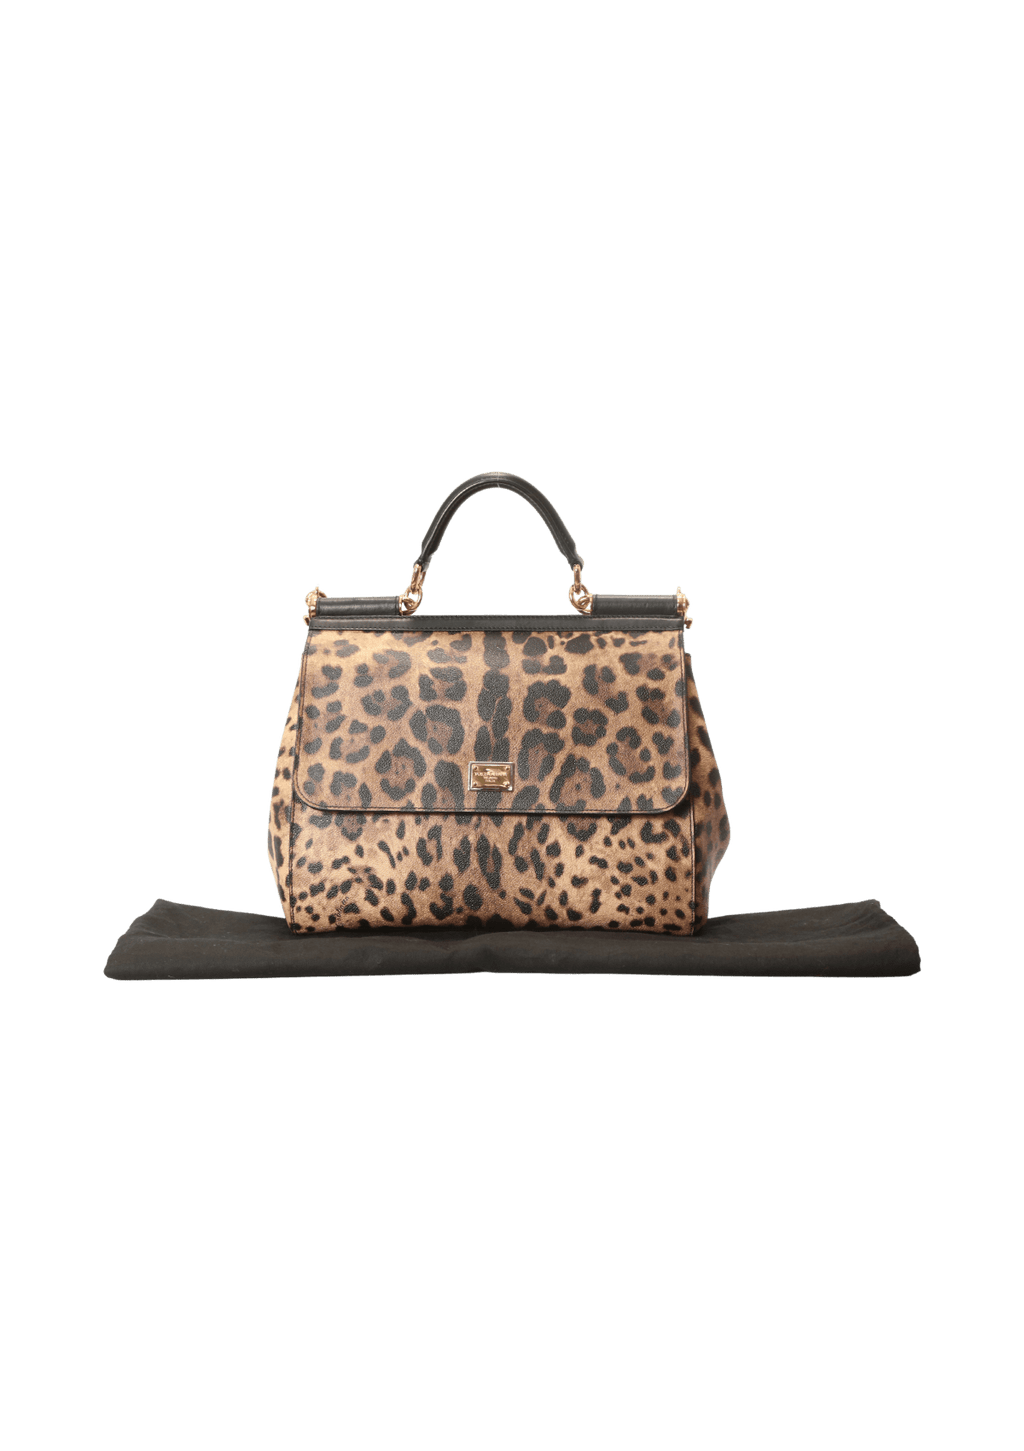 Dolce & Gabbana Large 'Dauphine Sicily' Tote in Brown